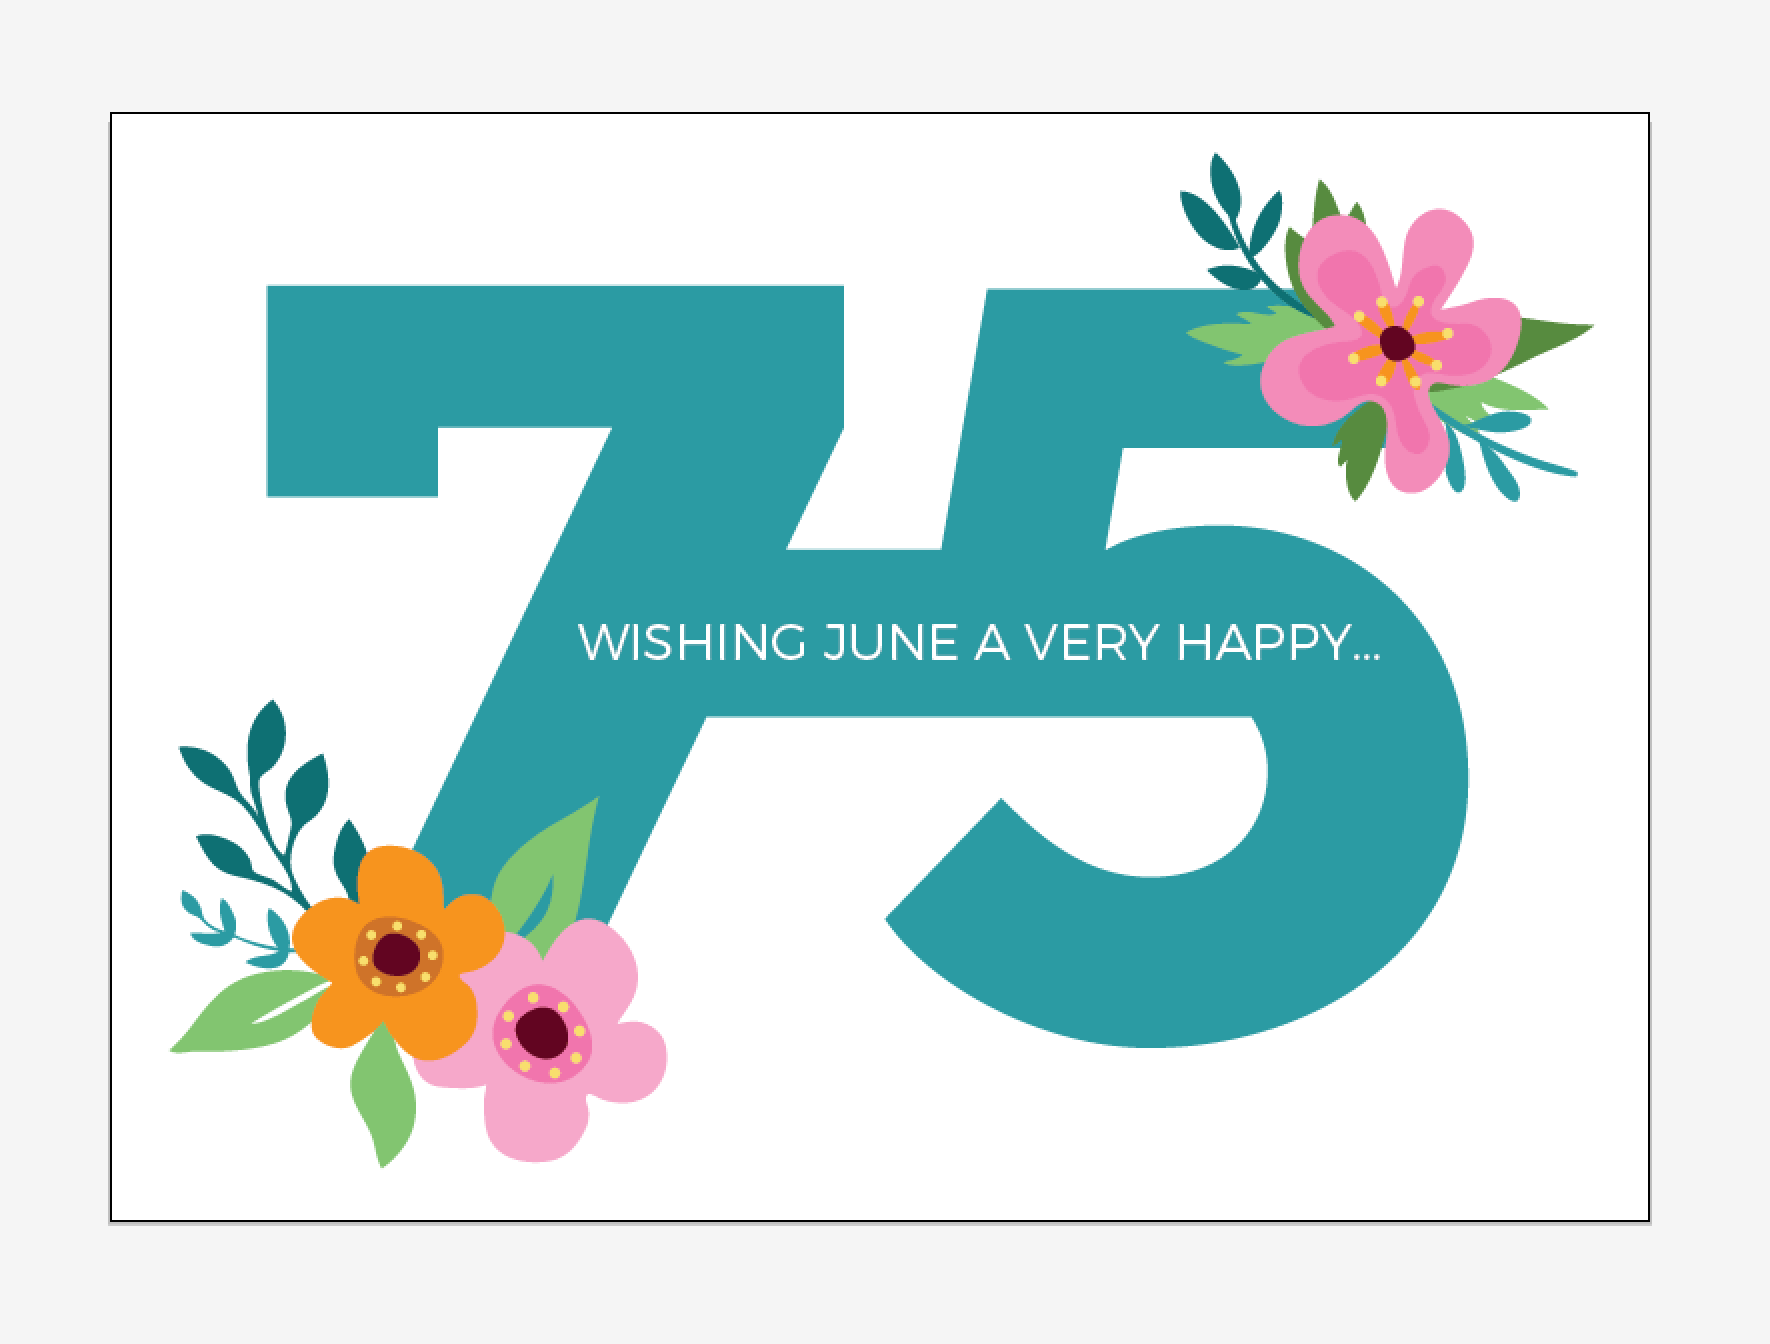 Here's a memorable and fun milestone birthday idea: a mailbox stuffed with personalized floral birthday postcards with well wishes from family and friends! Make them for 60th, 65th, 75th, 70th, 80th, 50th, 40th, 90th, 100th birthdays.